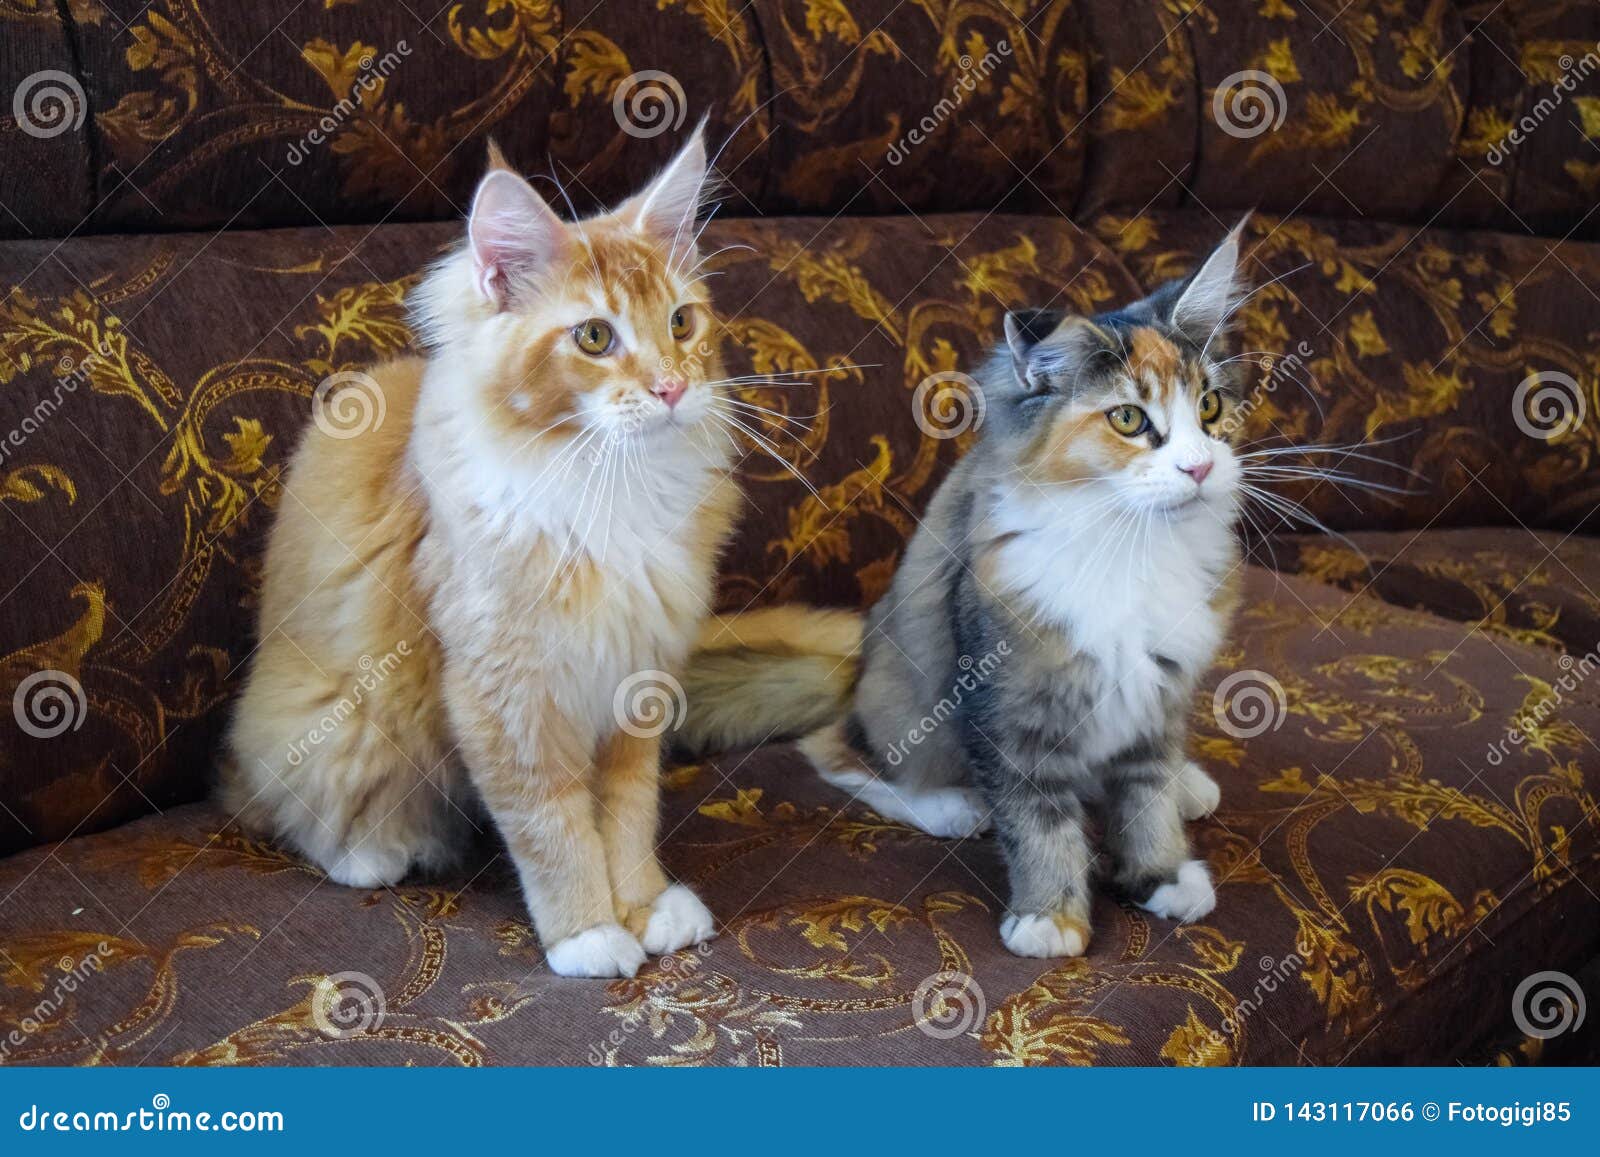 Giant Maine Coon Cat. Mainecoon Cat, Breeding of Purebred Cats at Home ...